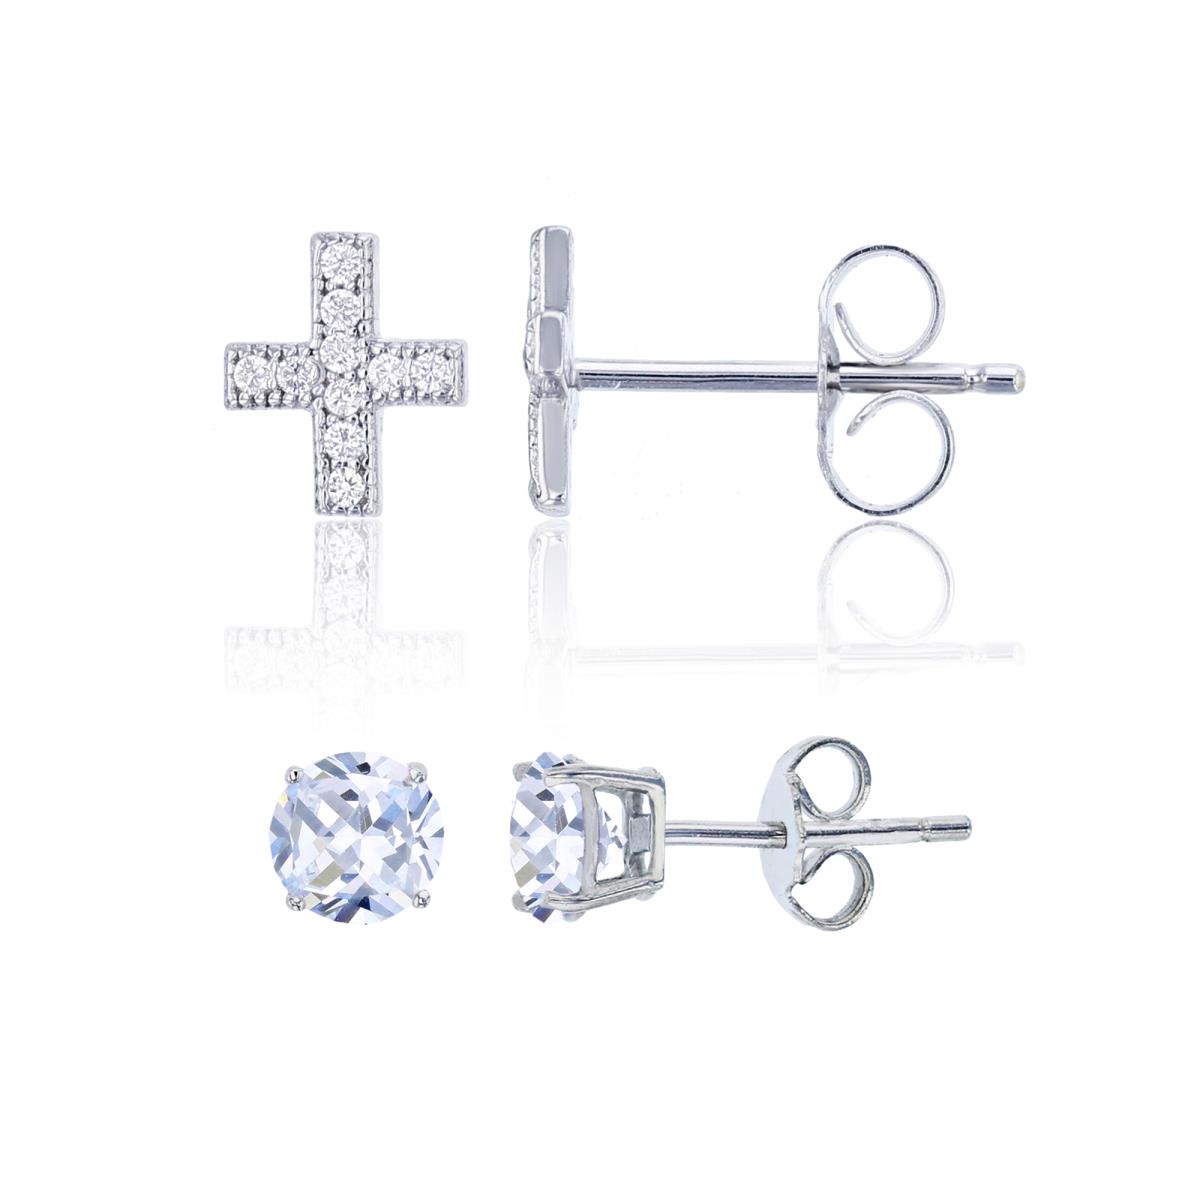 Sterling Silver Micropave Petite Cross & 5mm Round Solitaire Stud Earring Set